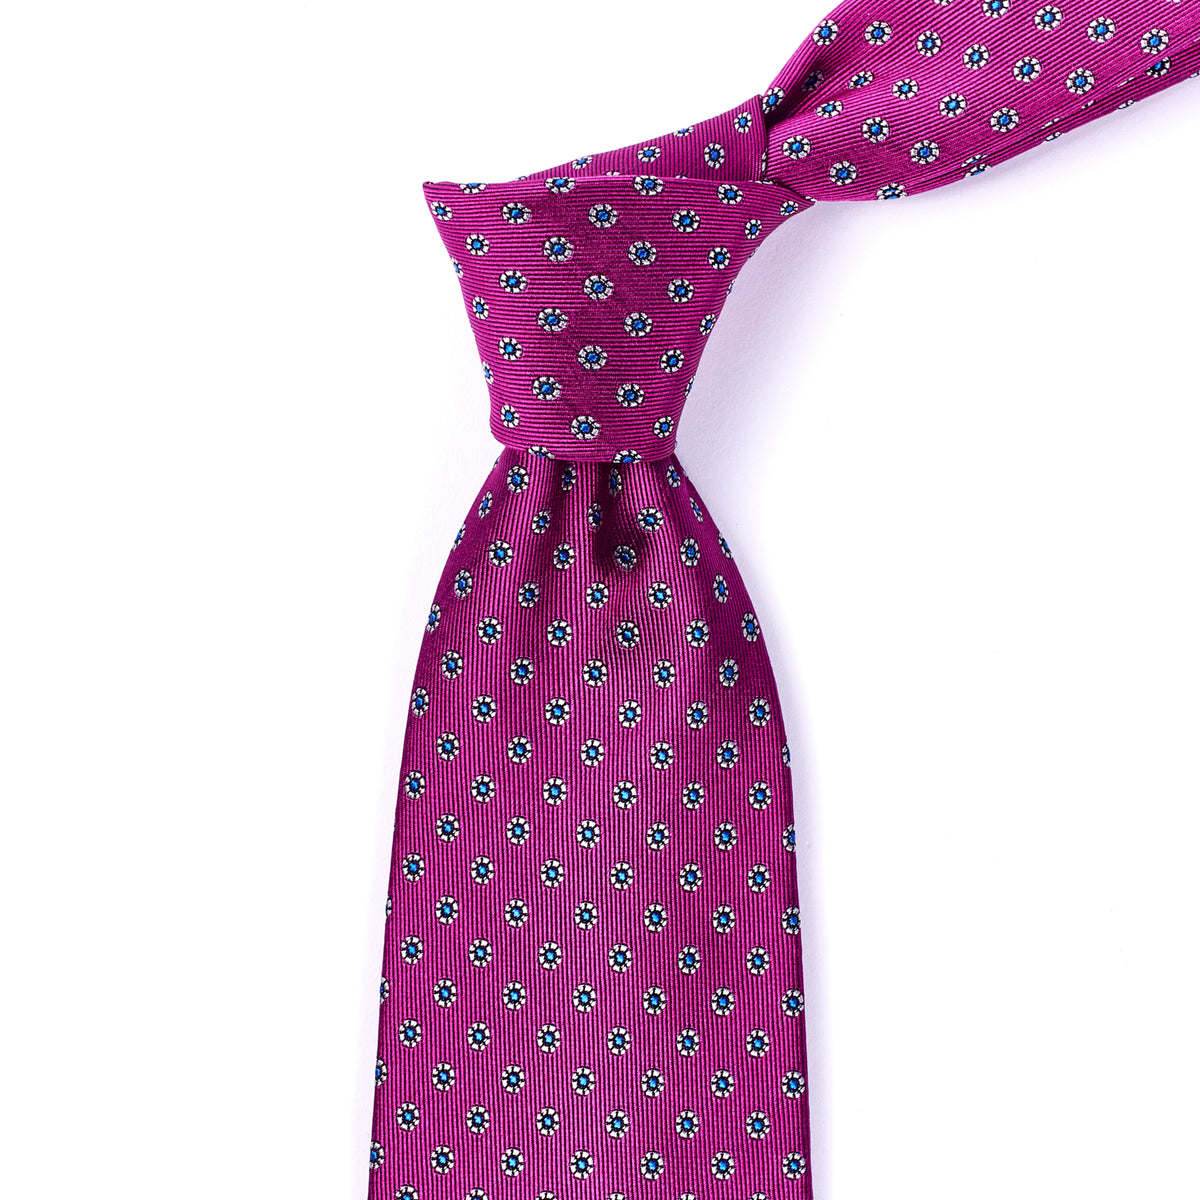 A Sovereign Grade Fuchsia Floral Jacquard Tie, 150 cm from KirbyAllison.com with a polka dot pattern was handmade in the United Kingdom.